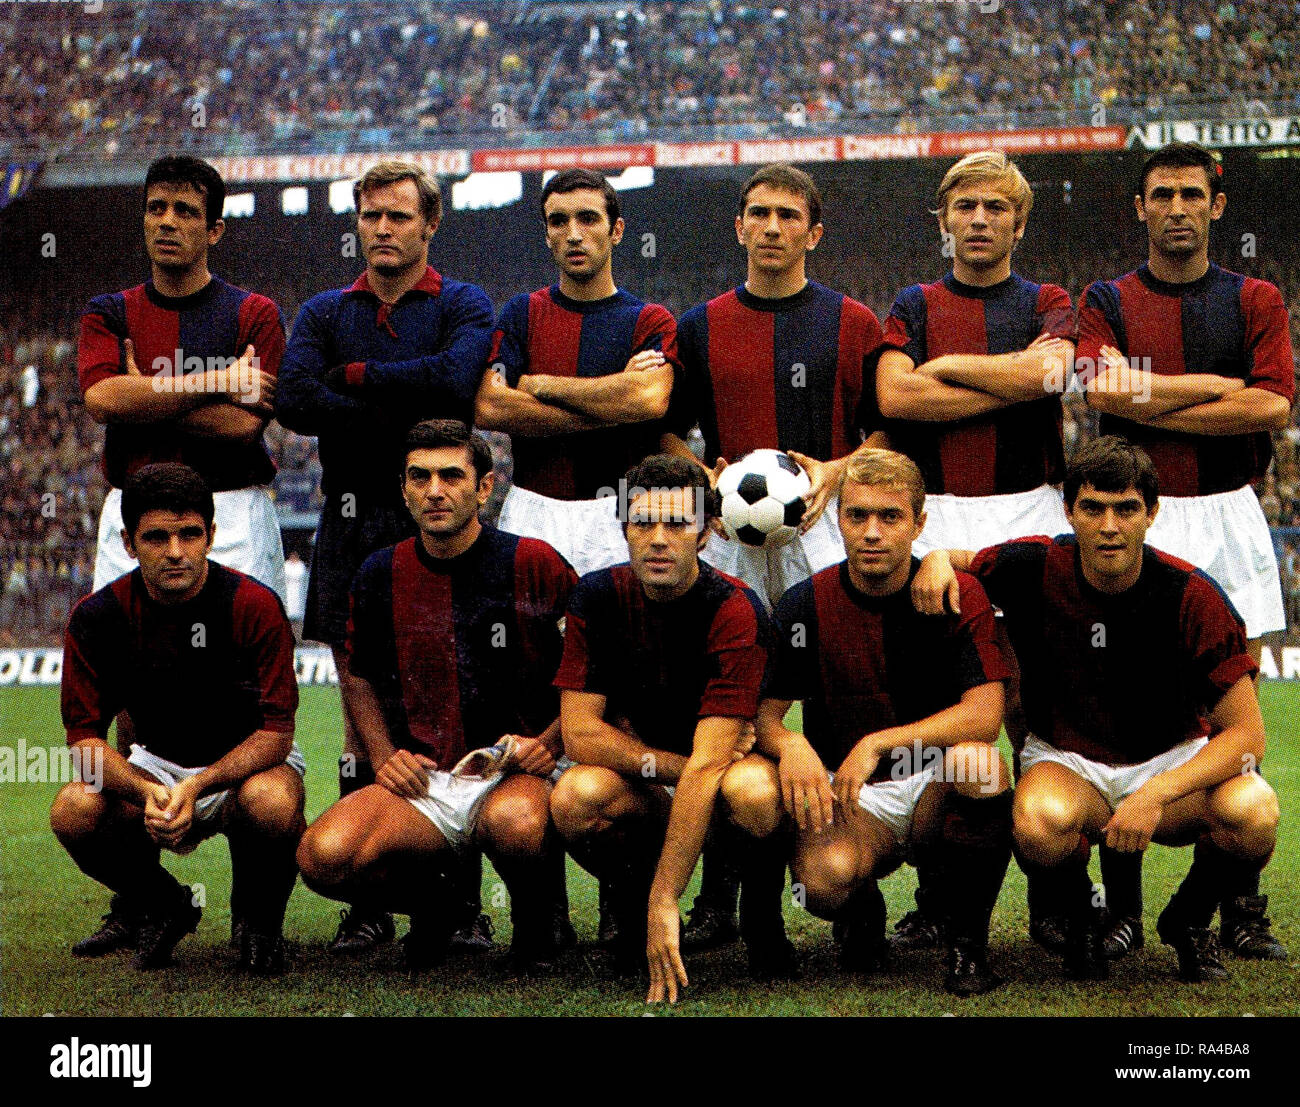 Milan, San Siro, September 14, 1969. A line-up of Bologna F.C. took to the field in the away defeat versus Inter Milan (0-1), Matchday 1 of the Italian Championship 1969–70 Serie A. From left to right, standing: F. Janich, G. Vavassori, F. Cresci, G. Savoldi, T. Roversi, M. Ardizzon; crouched: M. Perani, G. Bulgarelli (captain), L. Mujesan, I. Gregori, A. Scala. Stock Photo